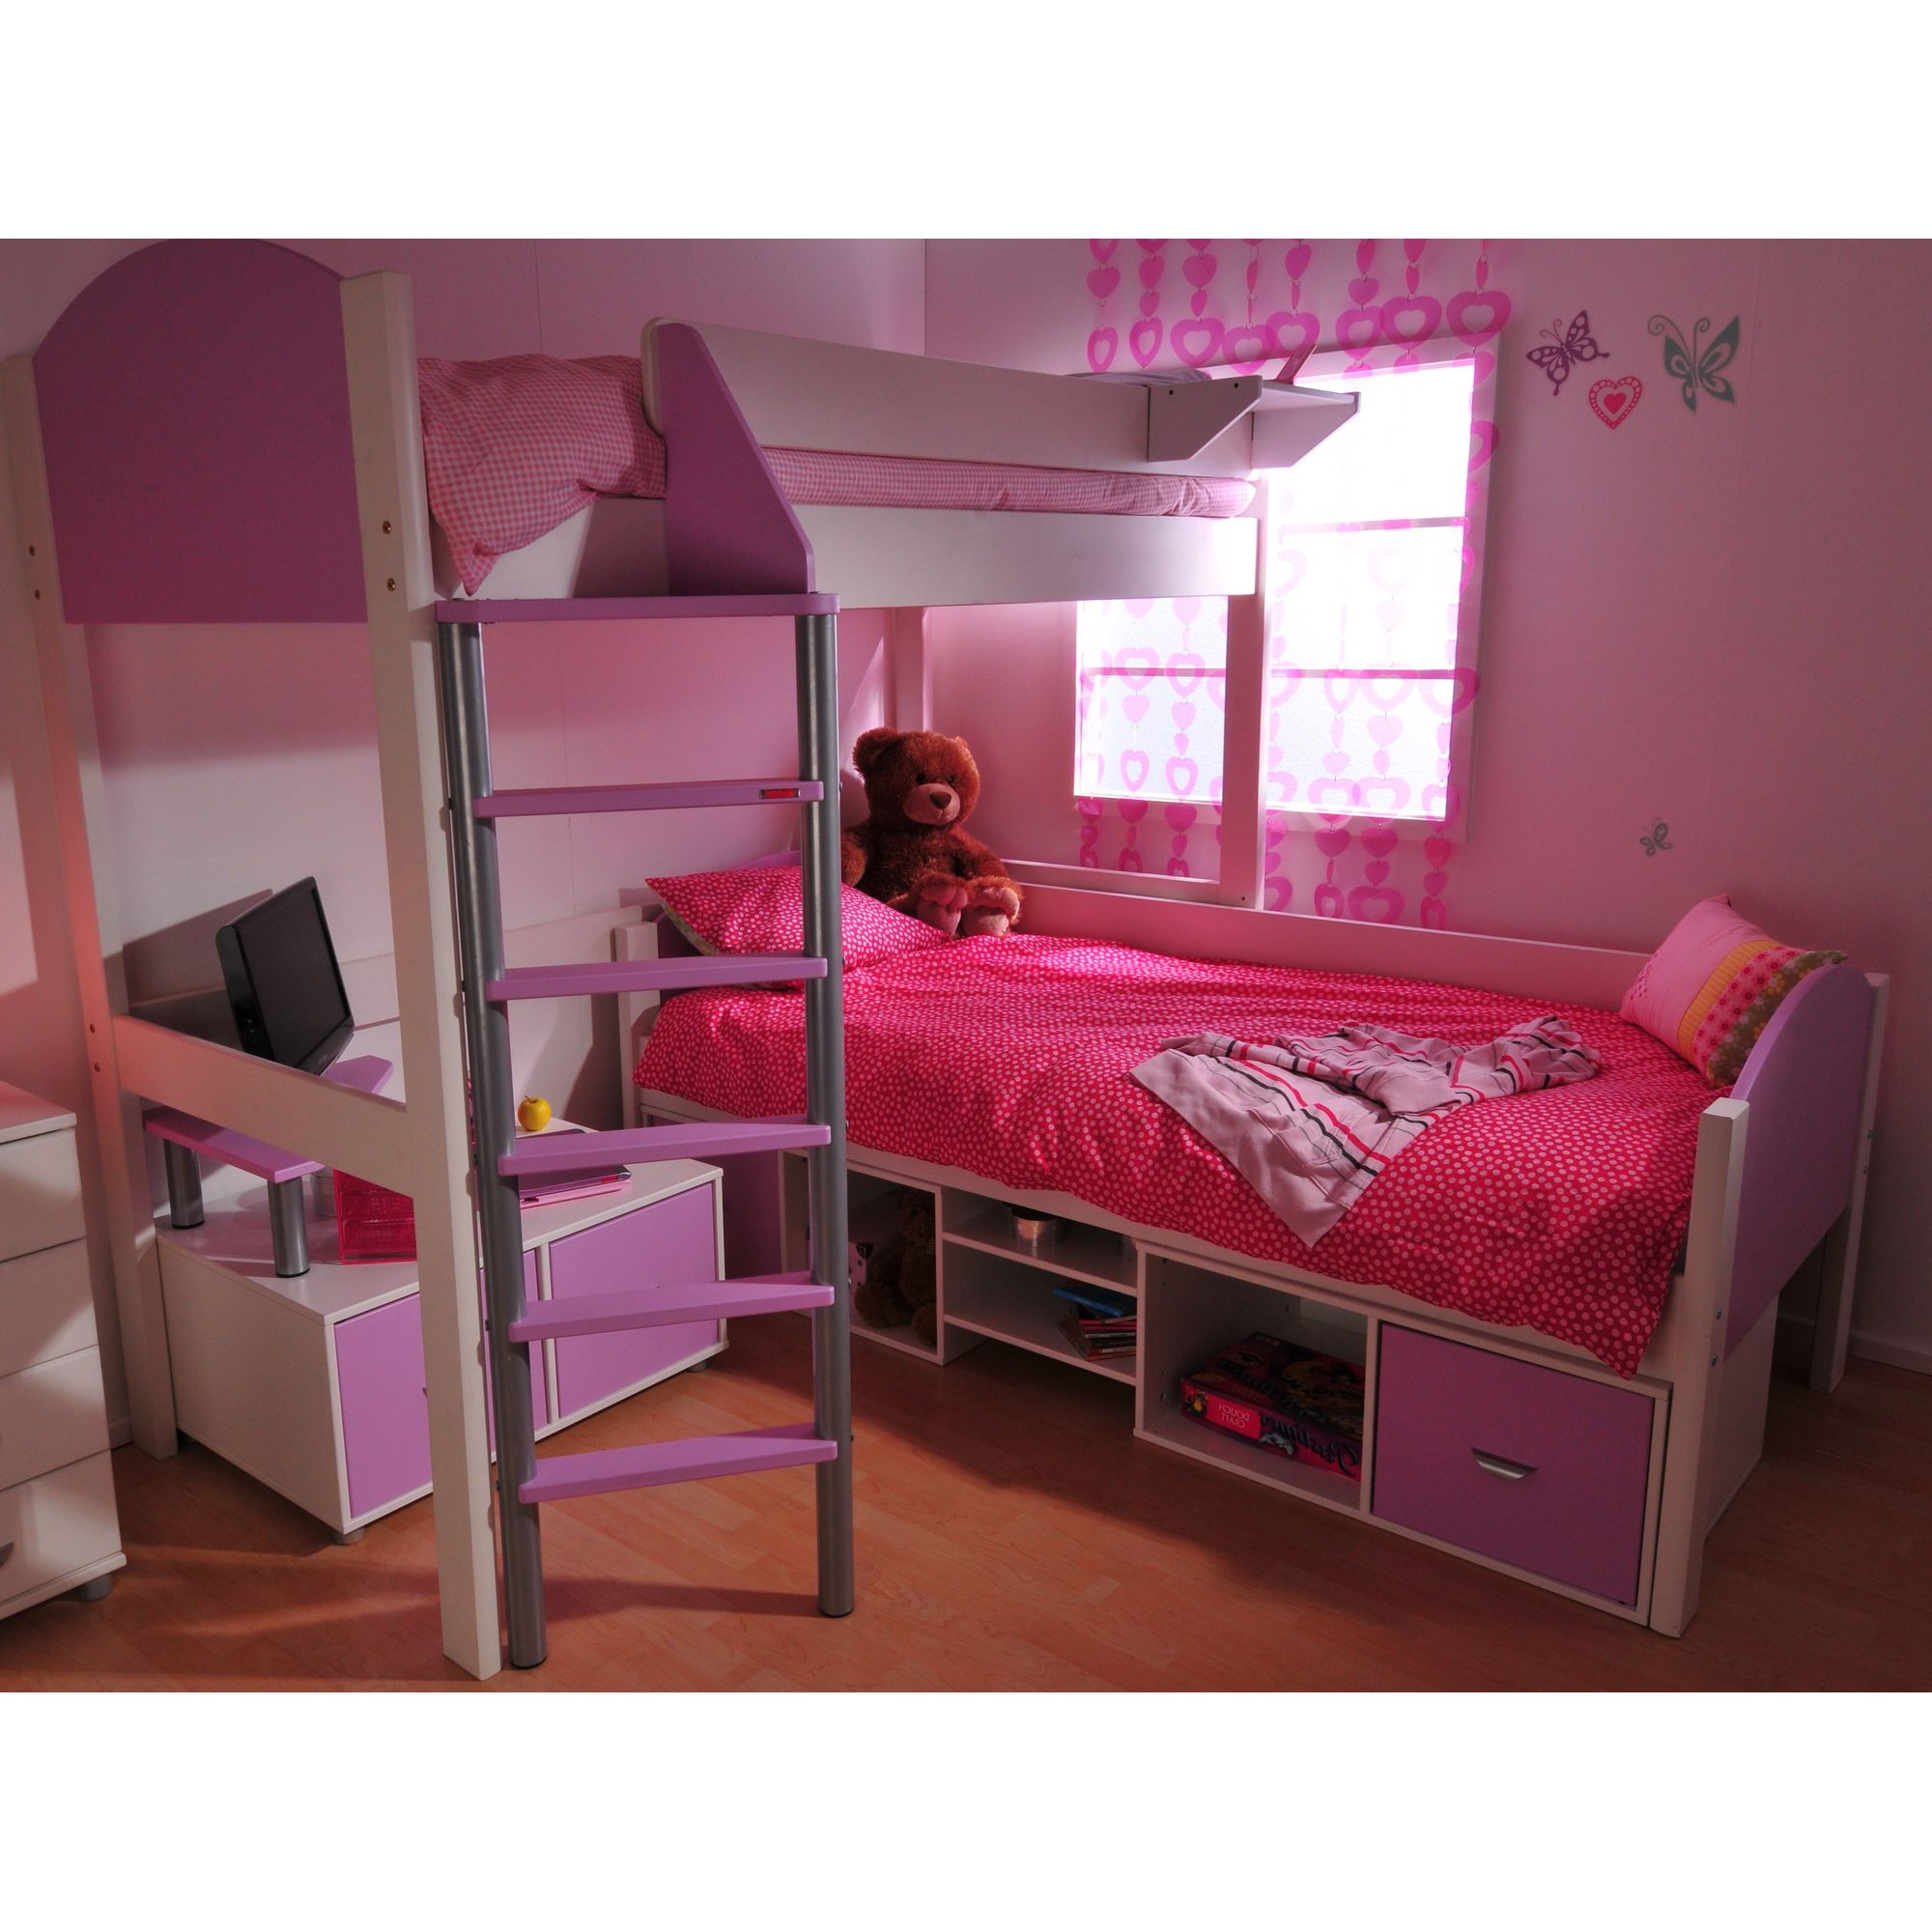 Stompa Casa High Sleeper with 2 Cube Unit and TV Stand - Antique - Black - Lilac at Tesco Direct